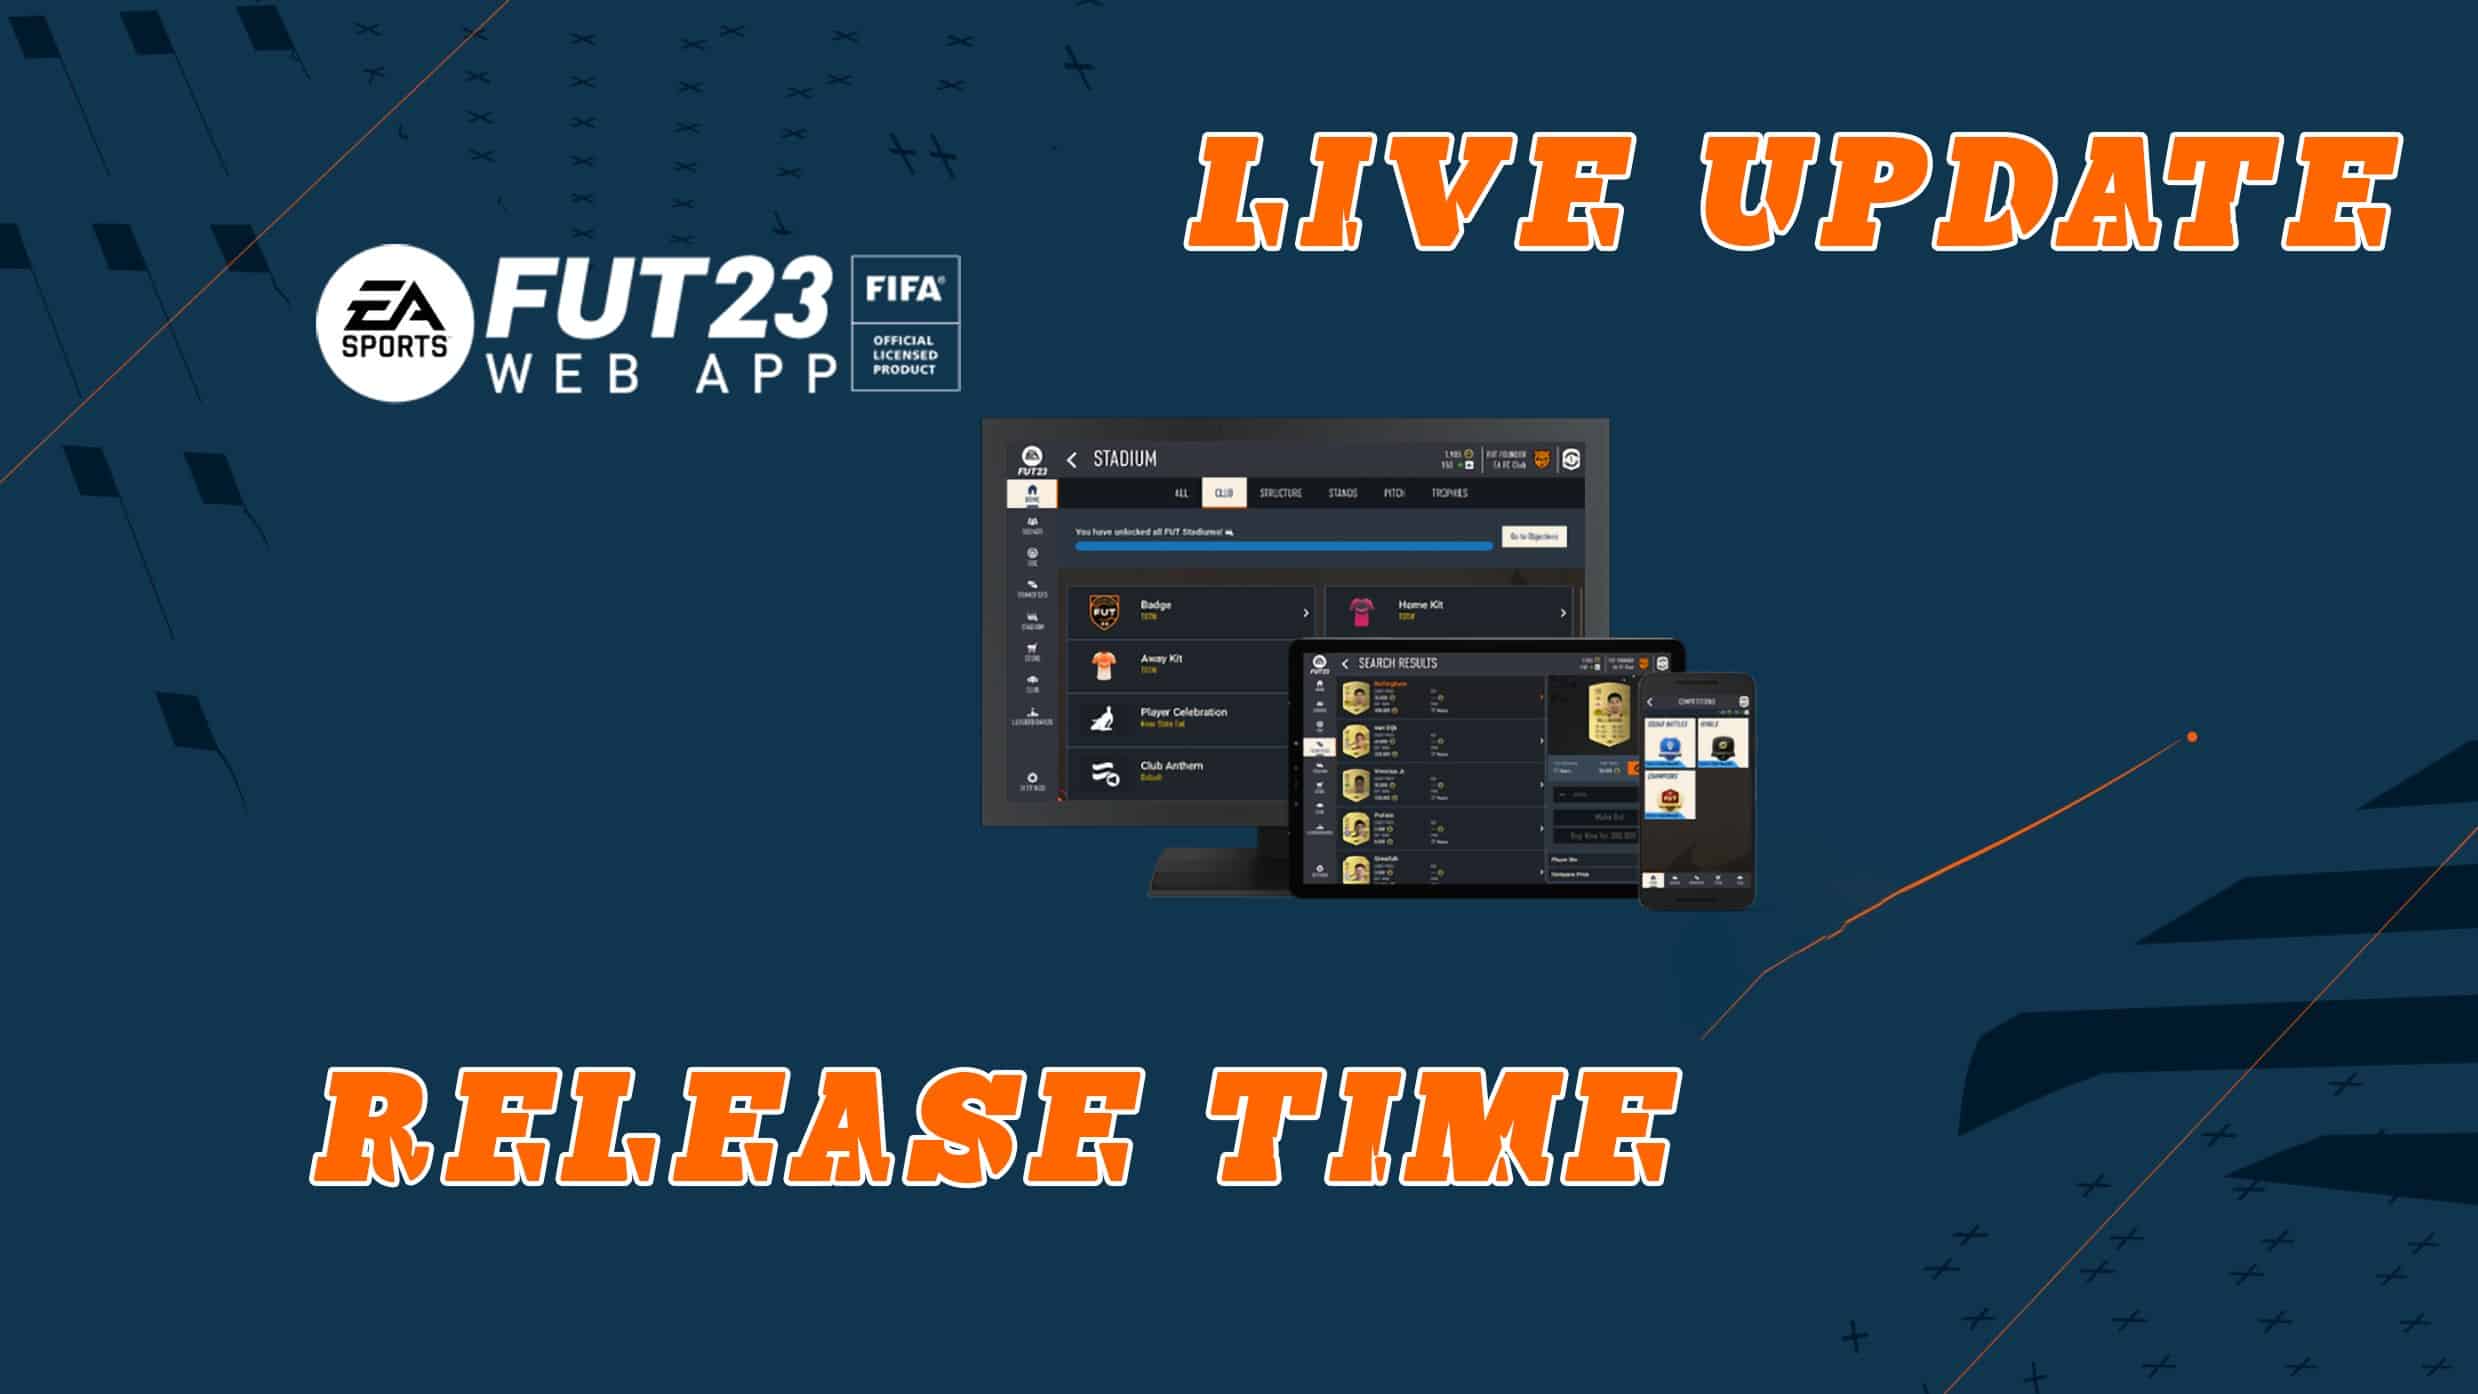 What time is the FUT 23 Web app release?